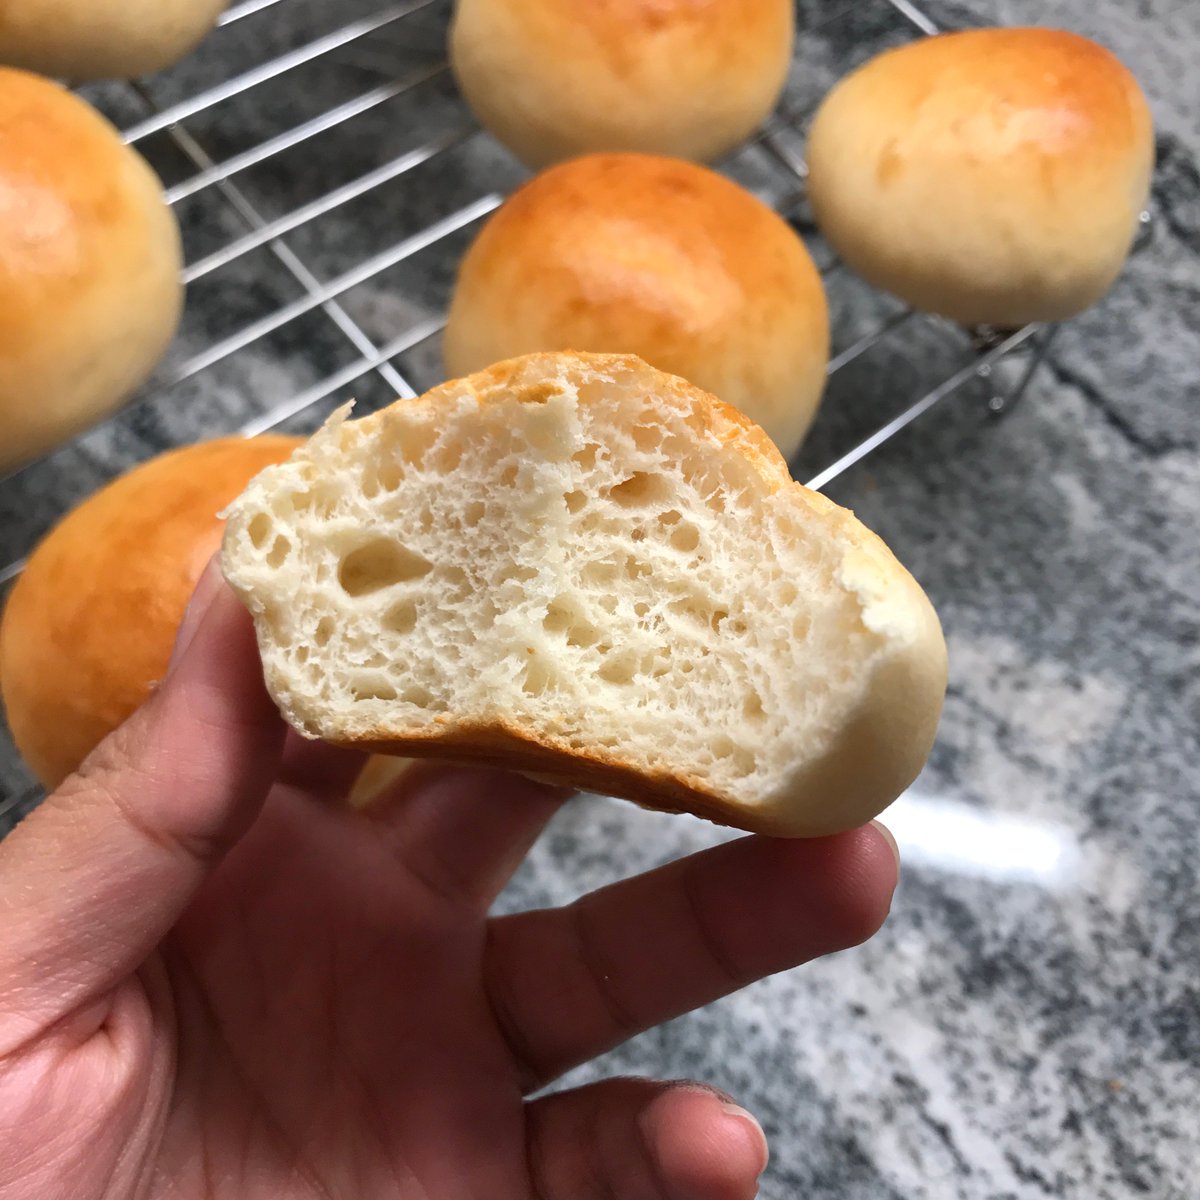 Bread #25: Potato Dinner Rolls. This is a showstopper! I've said before I'm not a big potato bread fan, but this one isn't very potatoey. It's gorgeous, doesn't need to rise for long (two rises, 30-60 mins each) and is absurdly soft & fluffy. everything you need in a dinner roll.